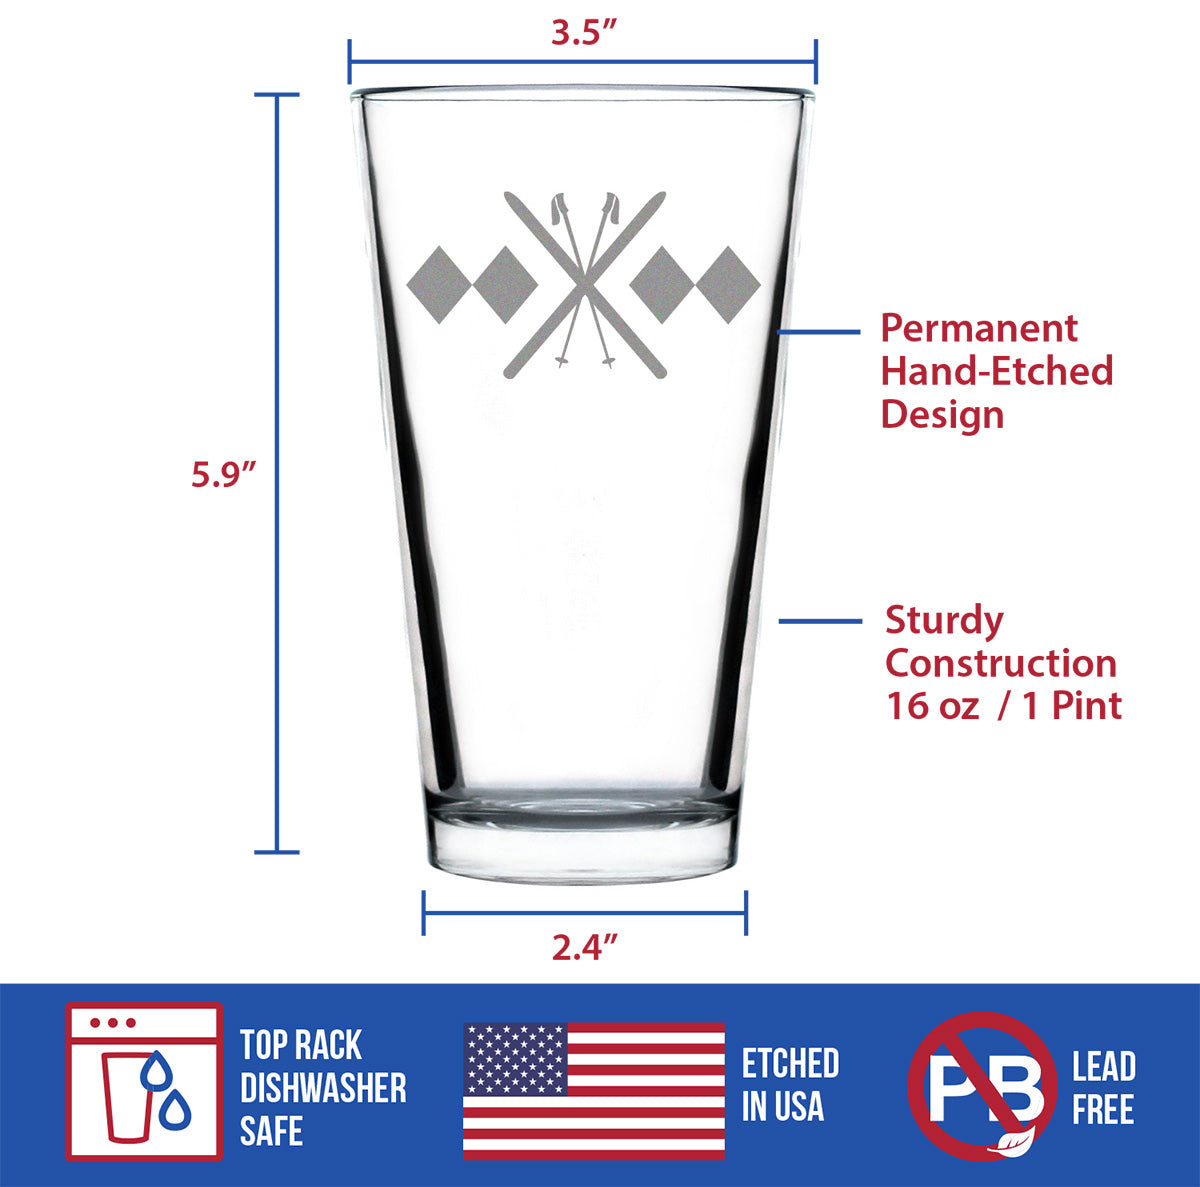 Double Black Diamond - Pint Glass for Beer - Unique Skiing Themed Decor and Gifts for Mountain Lovers - 16 oz Glasses